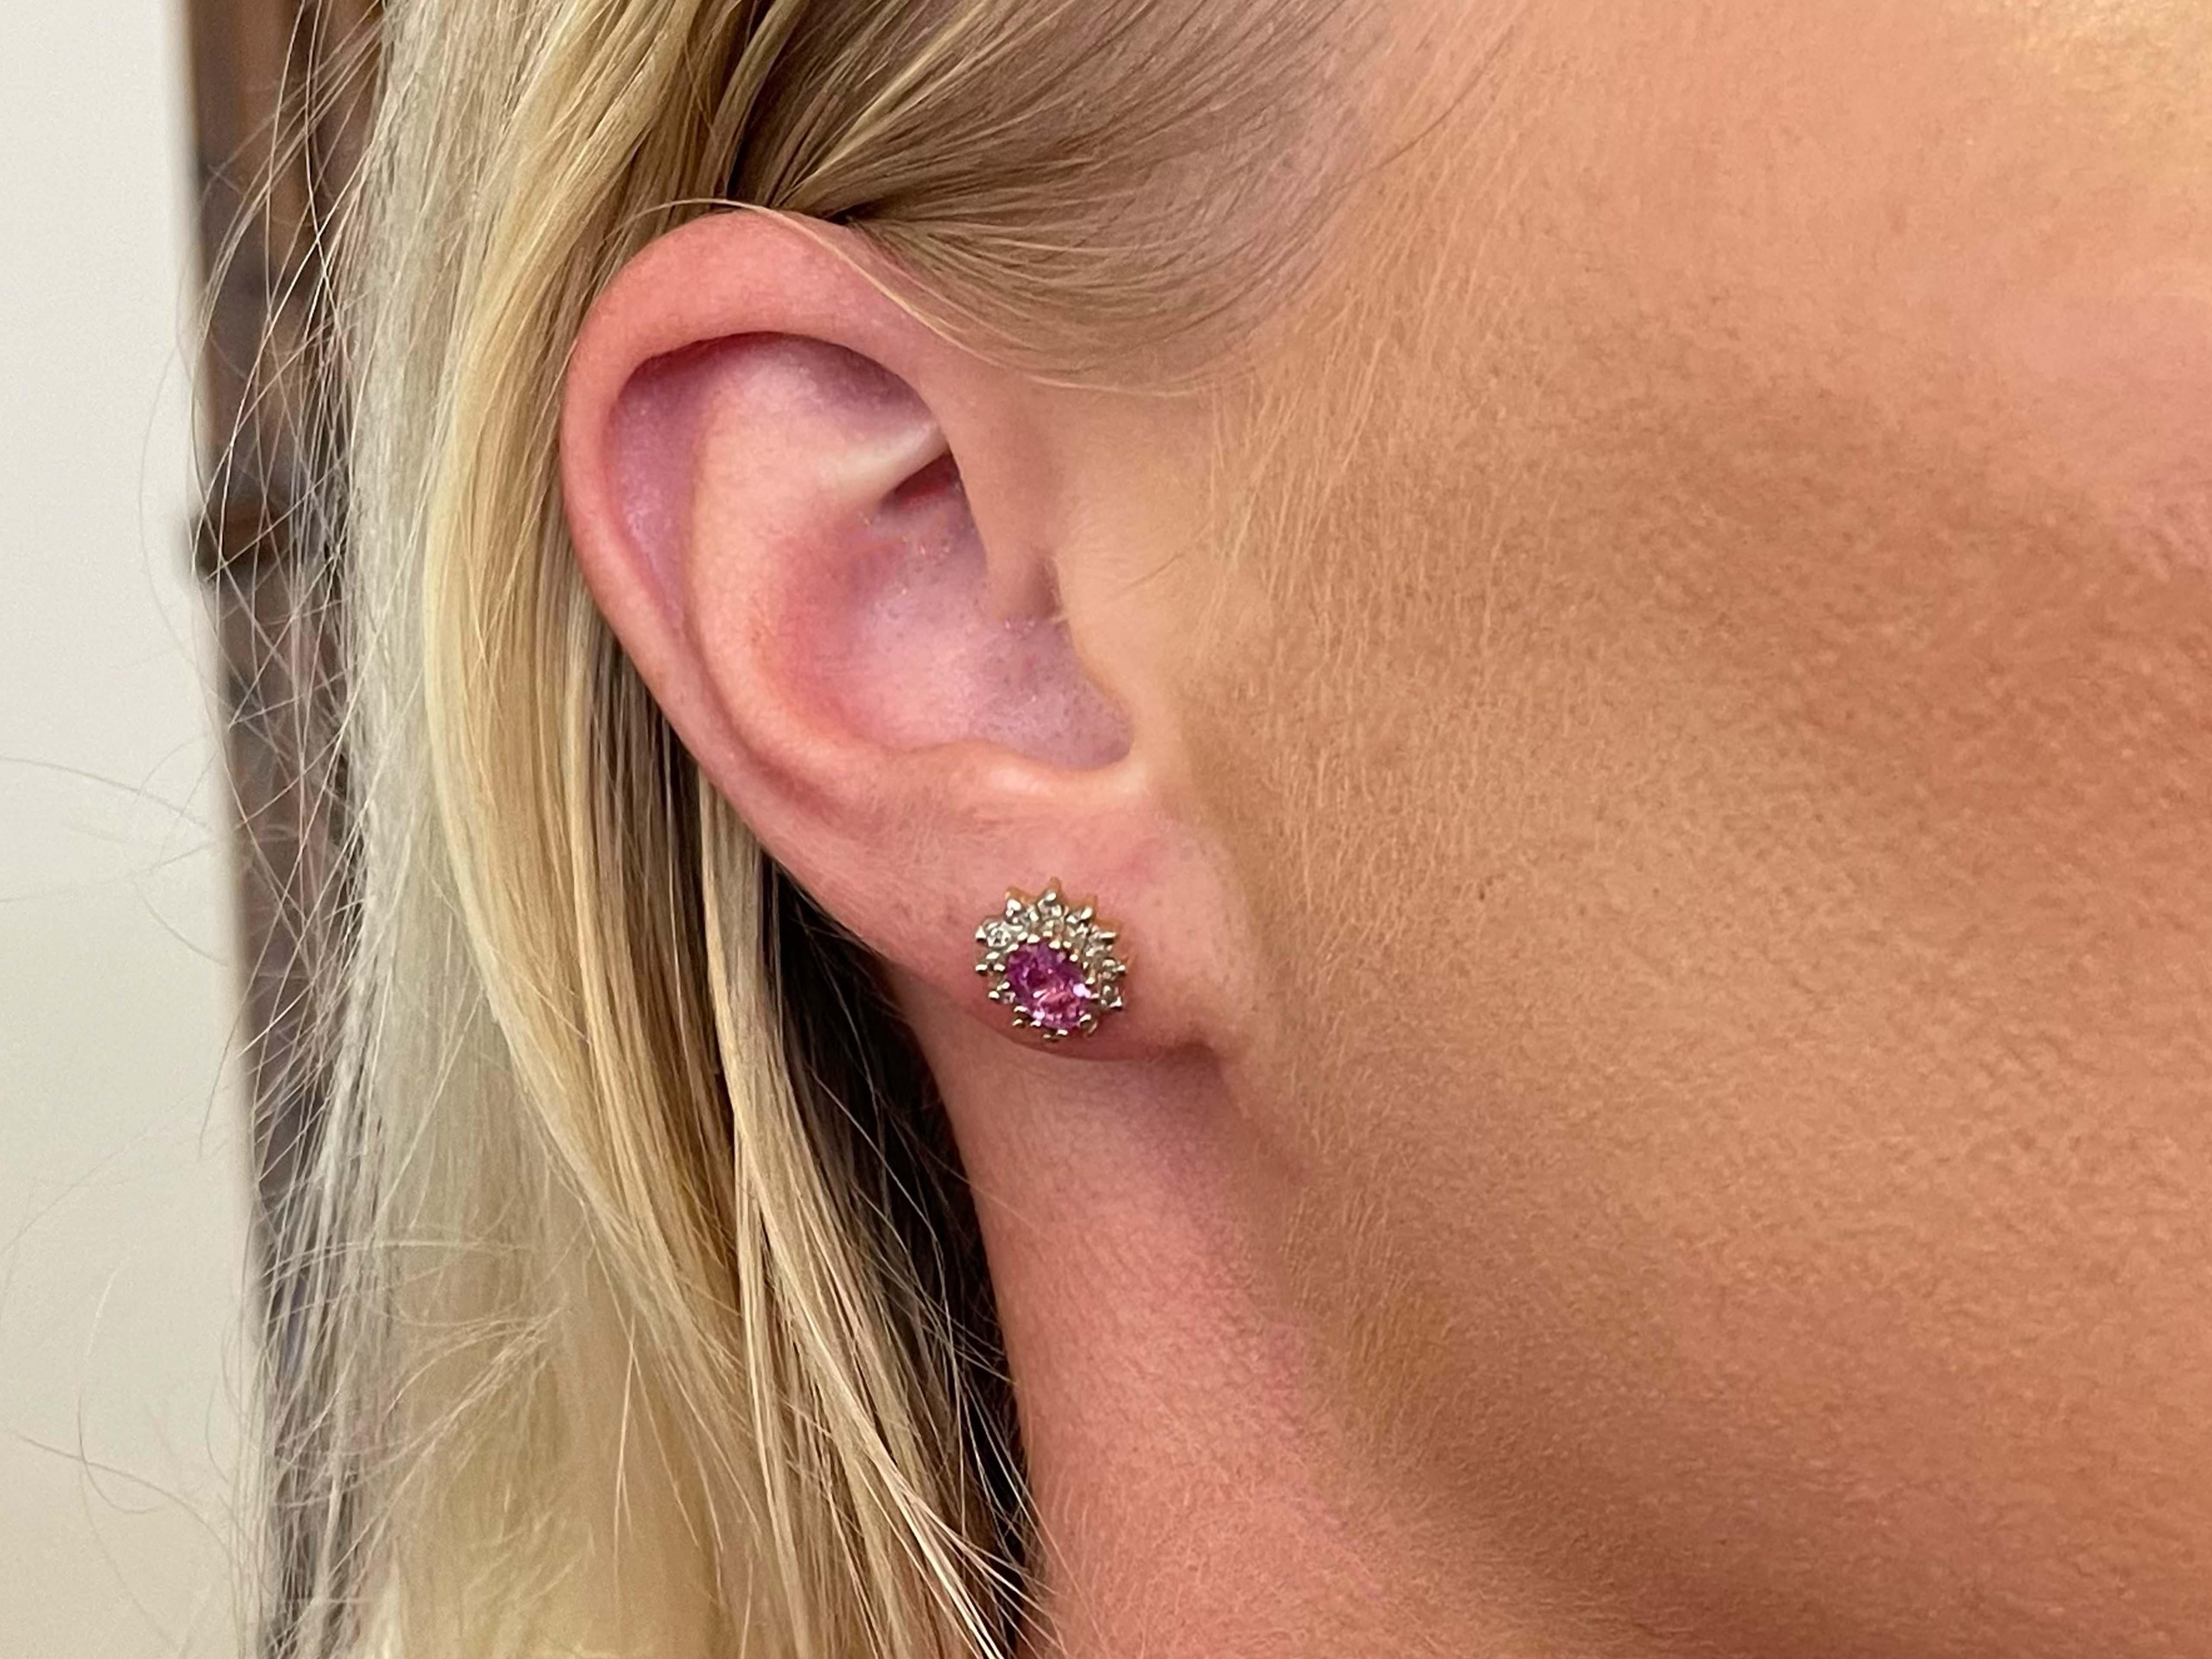 Earrings Specifications:

Metal: 14k Gold

Earring Length: 11 mm

Total Weight: 2.5 Grams

Gemstone: pink sapphire

Sapphire Carat Weight: ~1.20 carats

Diamonds: 24

Diamond Color: H-I

Diamond Clarity: VS2-SI1

Condition: Preowned

Stamped: